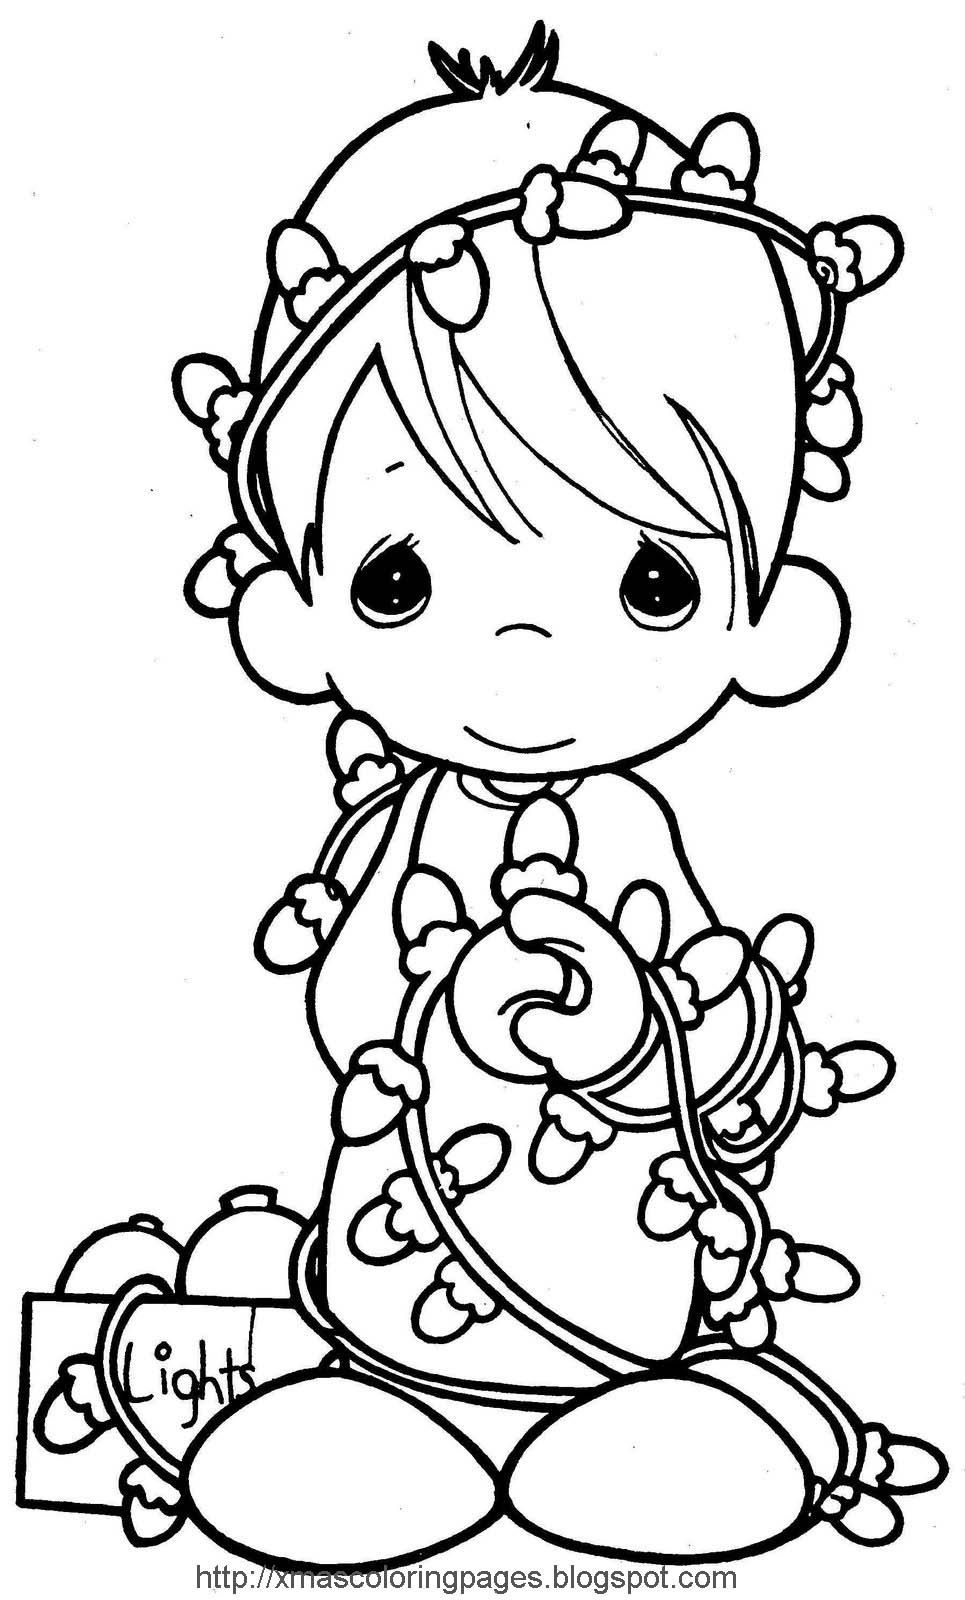 Xmas Coloring Pages: Angel Coloring Page | Color Sheets | Precious - Free Printable Christmas Lights Coloring Pages